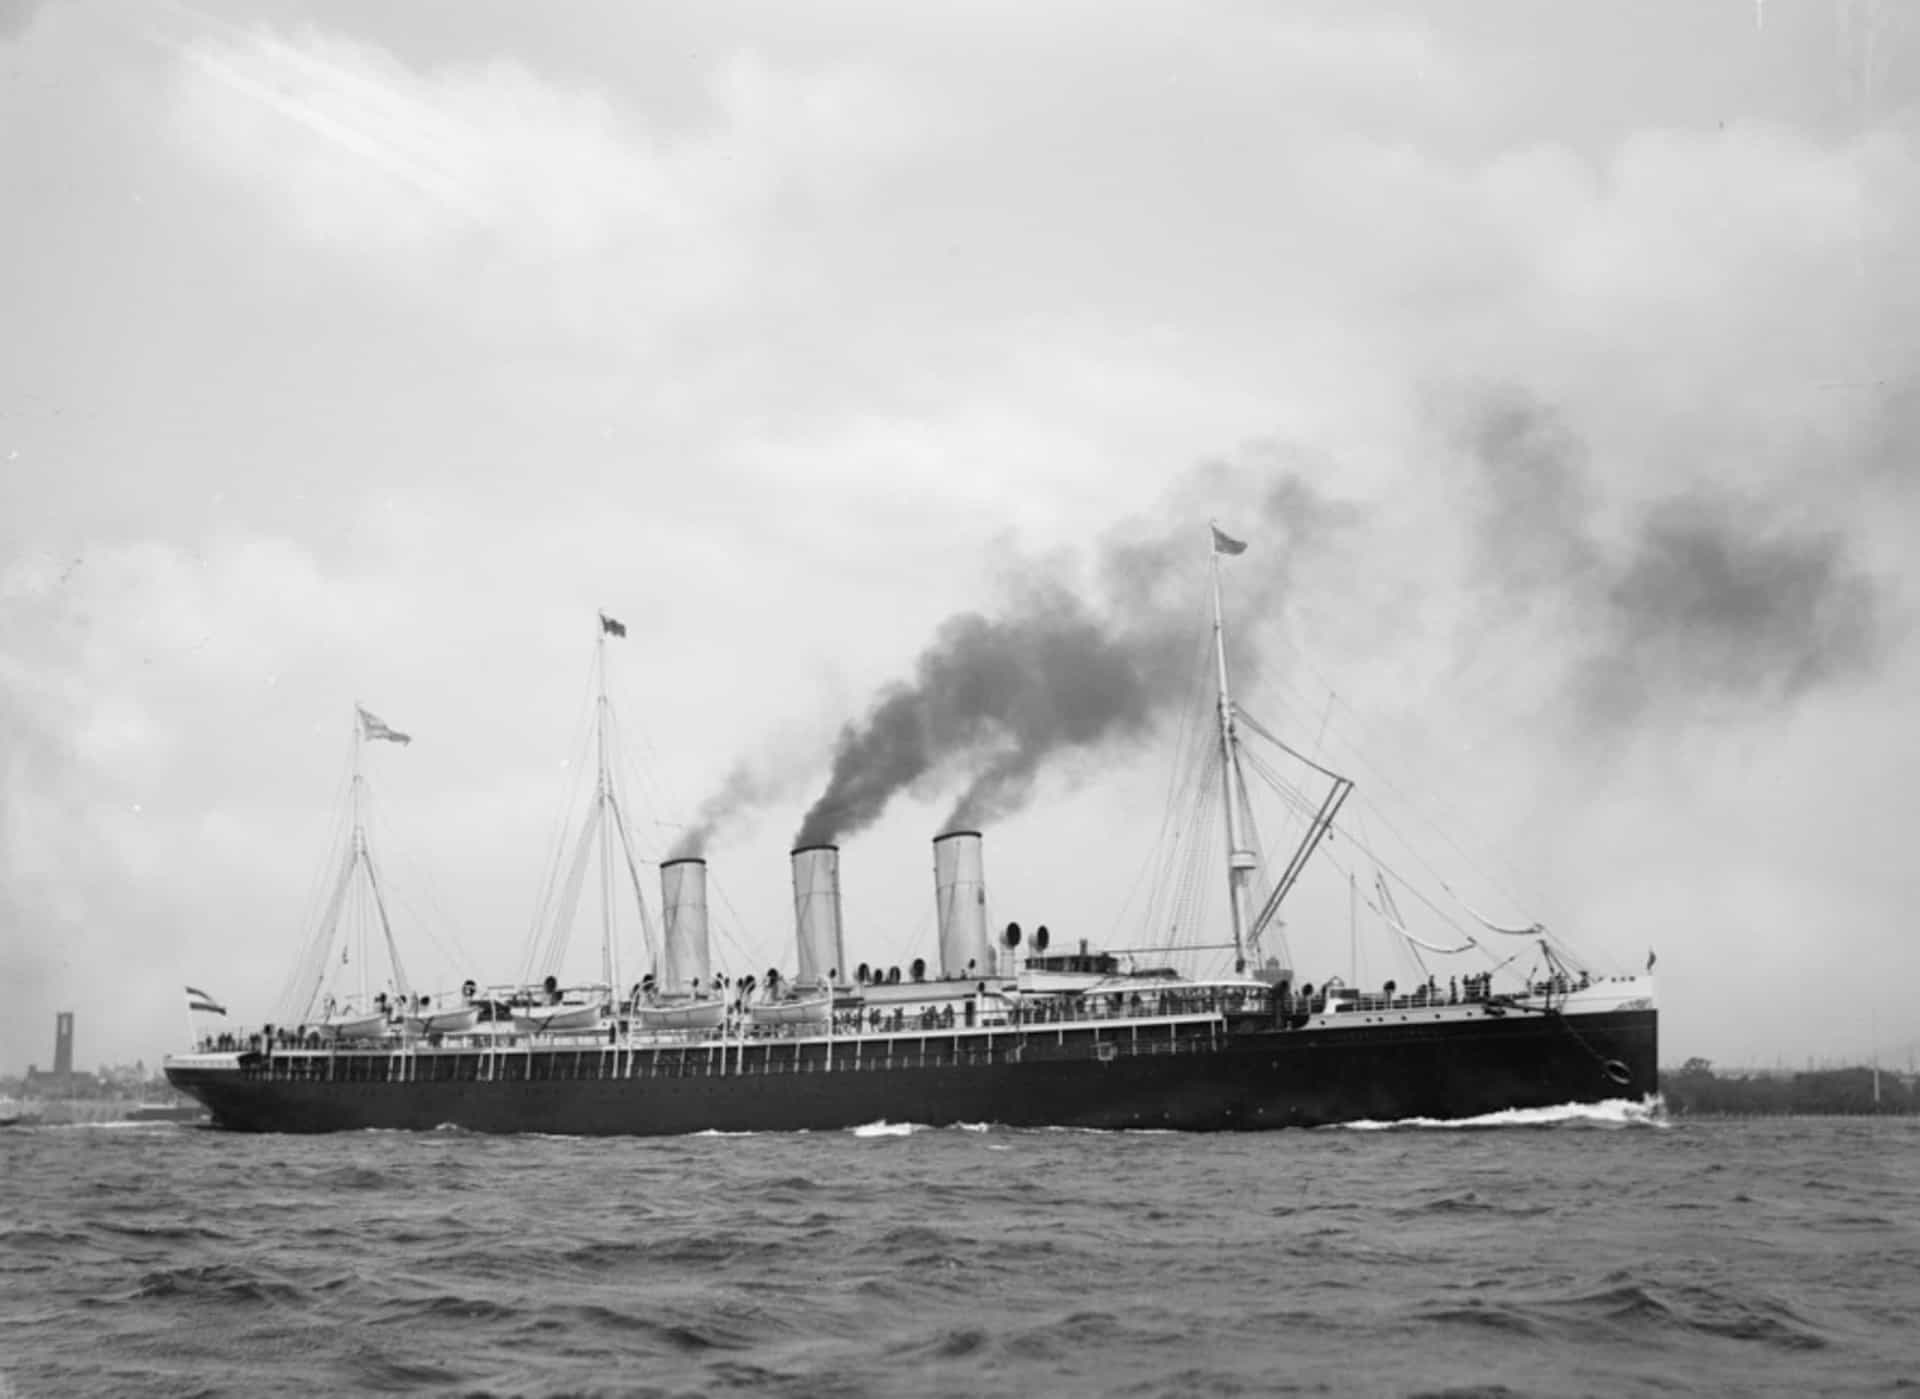 <p>On January 2, 1891, the German vessel<em> SS Augusta Victoria</em> embarked on a voyage to the Mediterranean and the Near East, a cruise that helped promote this burgeoning leisure product to a wider public.</p><p><a href="https://www.msn.com/en-za/community/channel/vid-7xx8mnucu55yw63we9va2gwr7uihbxwc68fxqp25x6tg4ftibpra?cvid=94631541bc0f4f89bfd59158d696ad7e">Follow us and access great exclusive content every day</a></p>